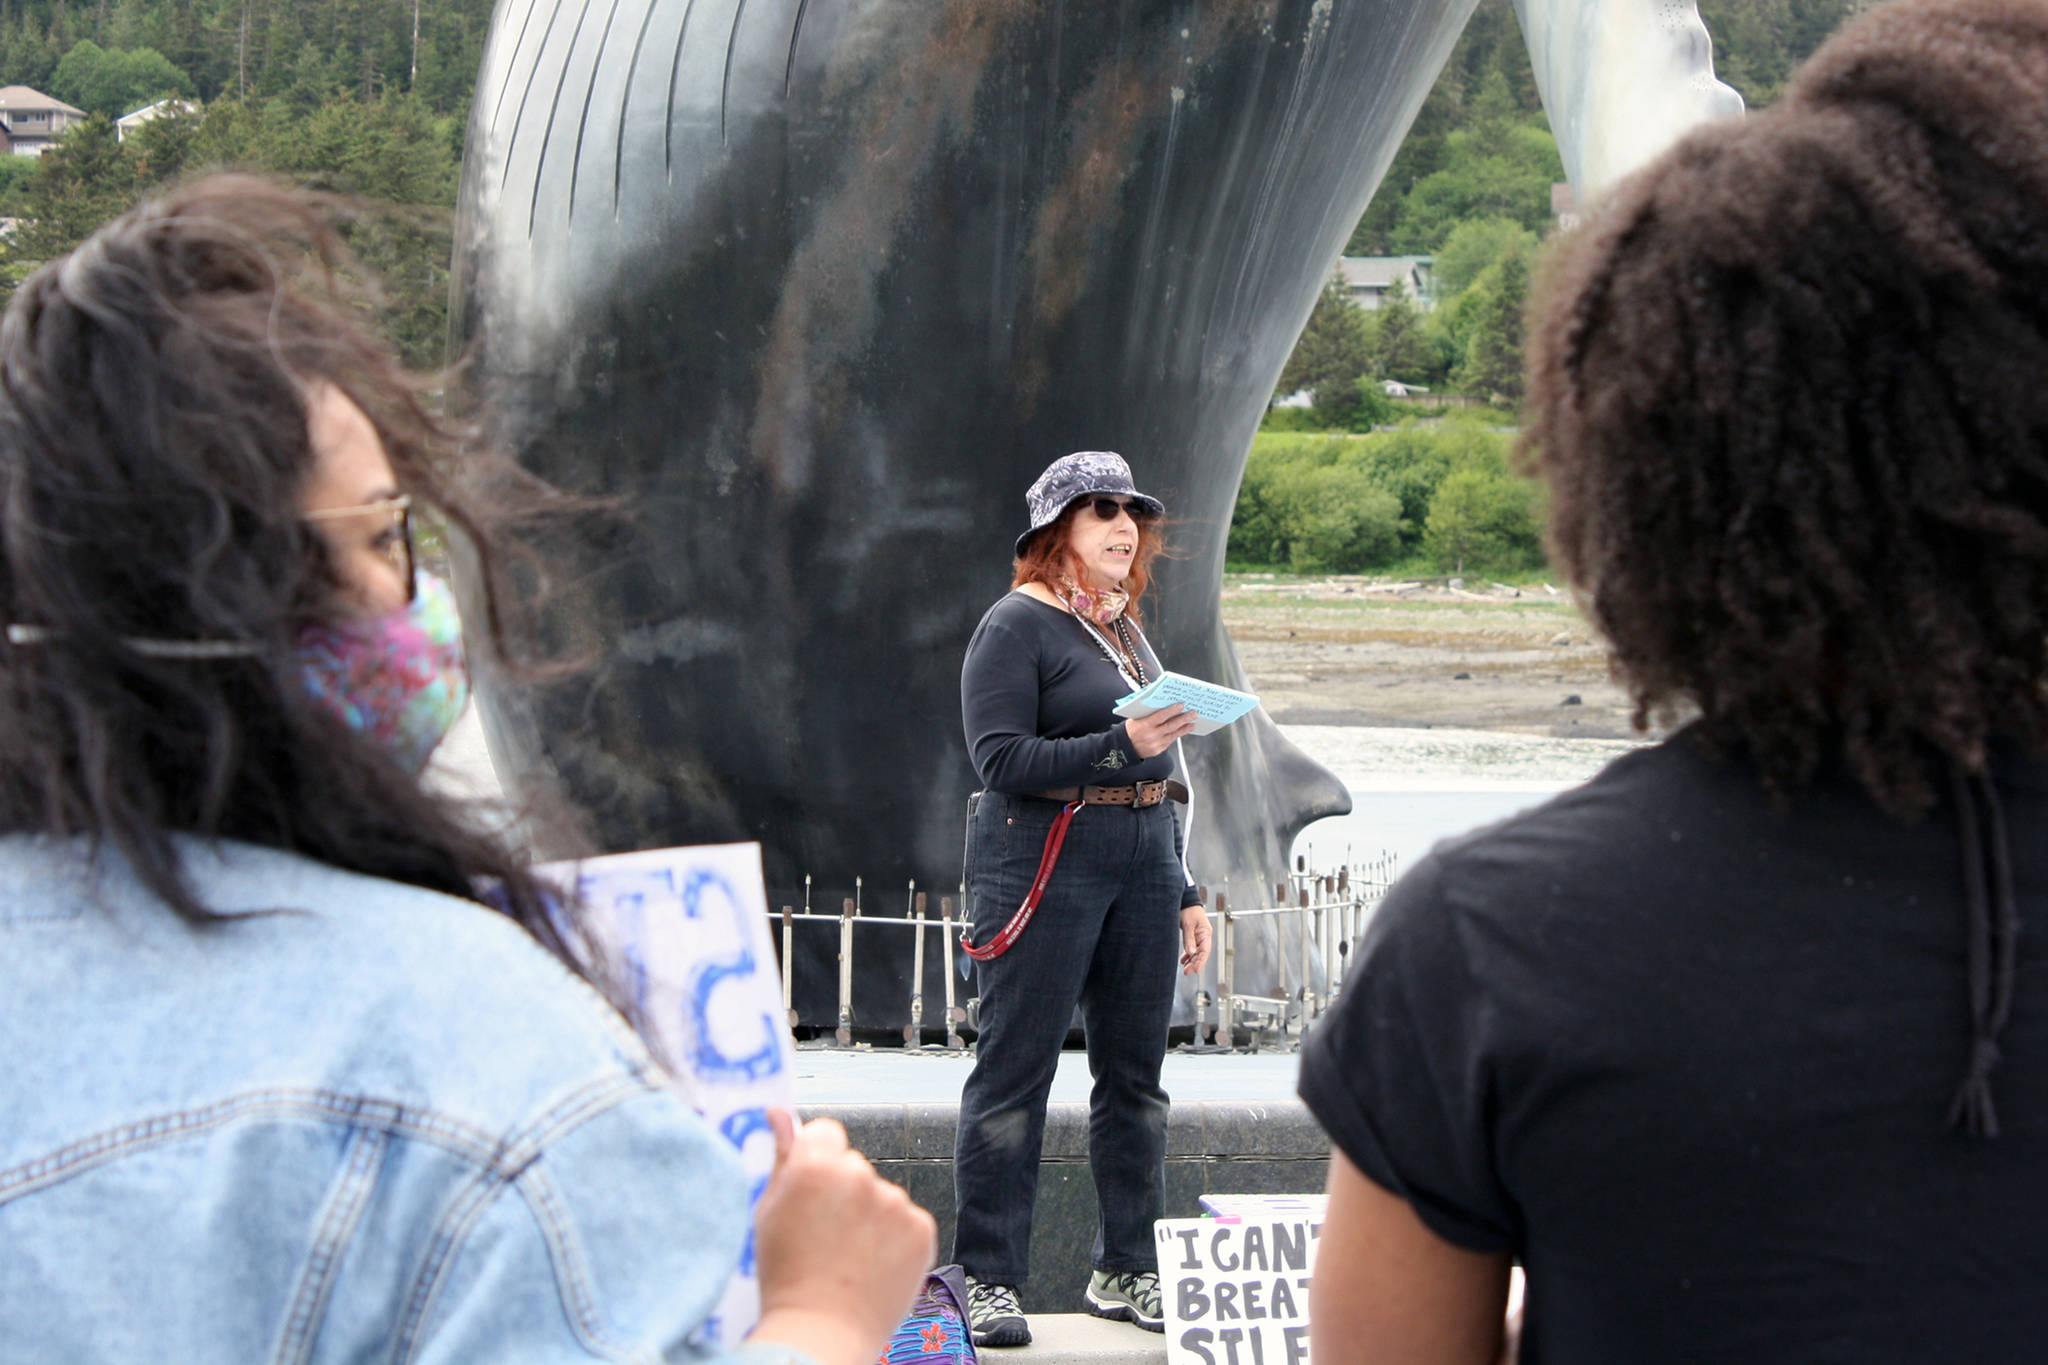 Christianne Carrillo and Jennifer Gross listen while Gloria Merry talks to begin the “I Can’t Breathe” vigil held Saturday, May 30 at Mayor Bill Overstreet Park. Most attendees wore masks, many brought protest signs and the event was peaceful. (Ben Hohenstatt | Juneau Empire)